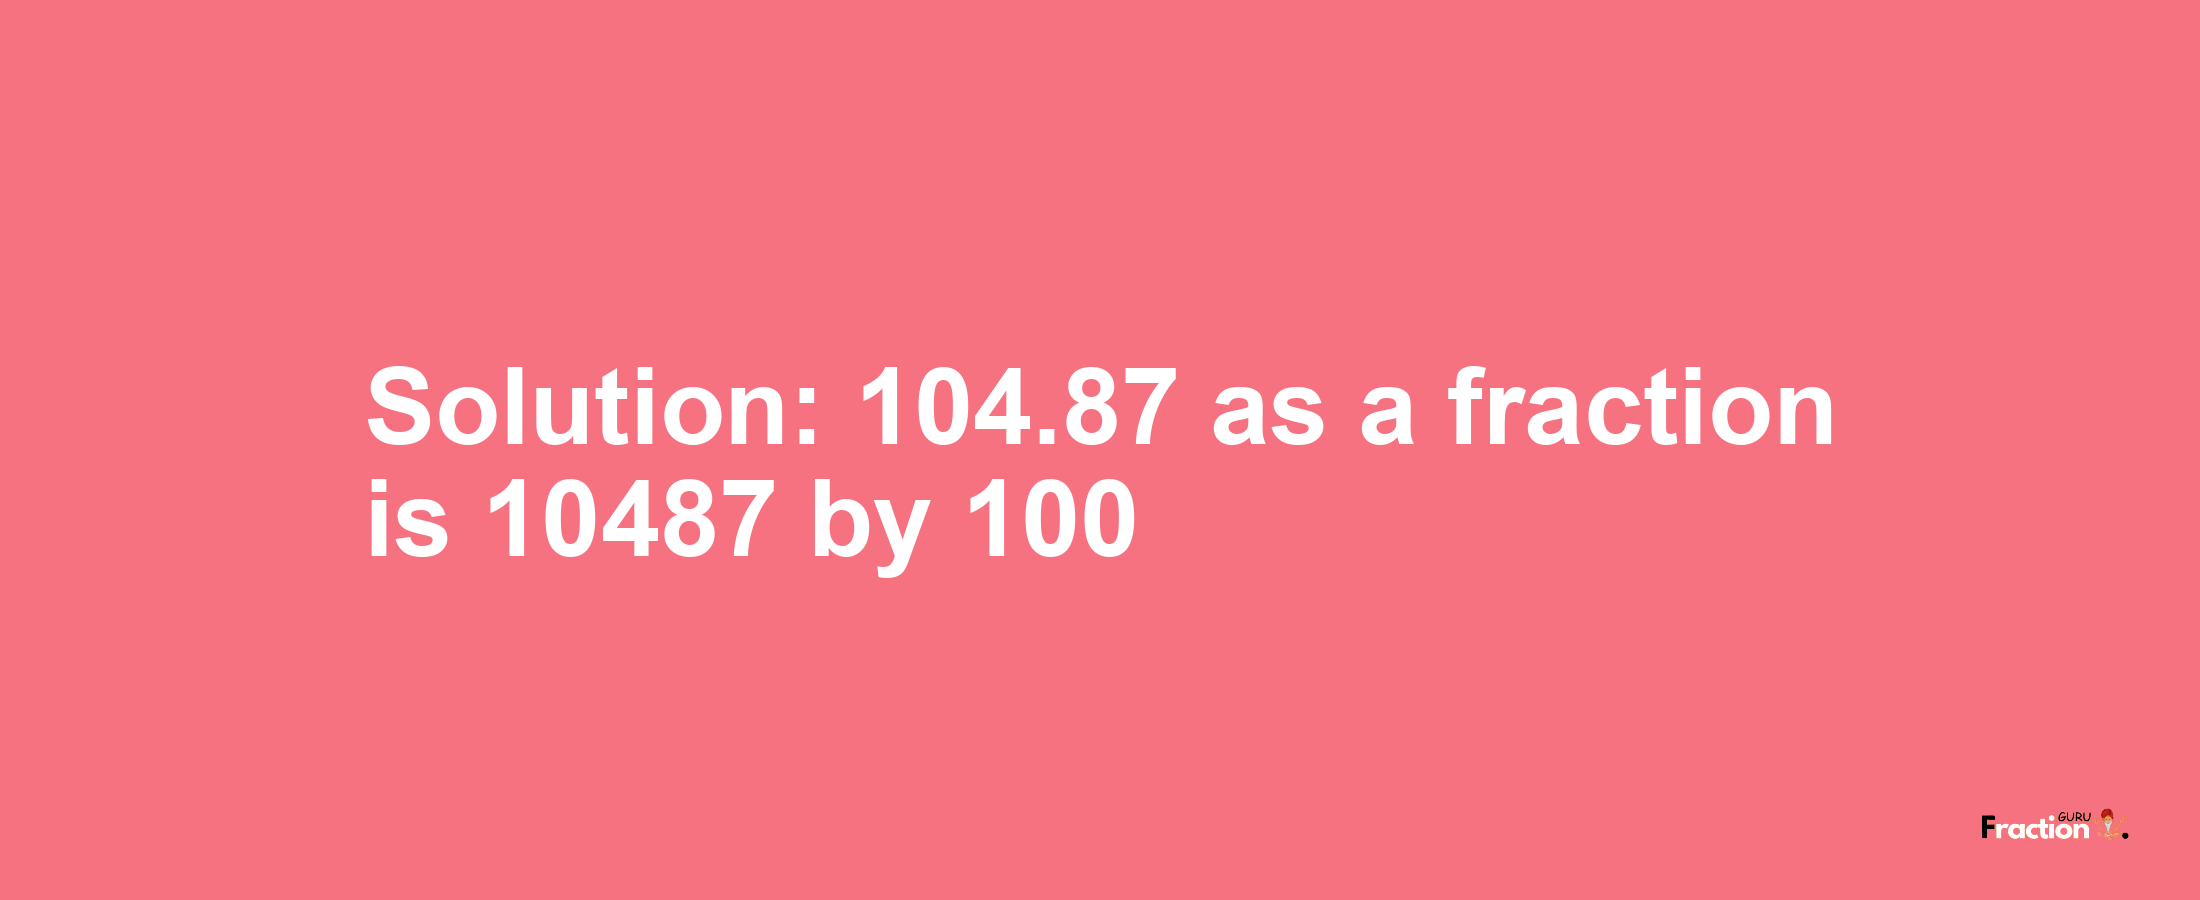 Solution:104.87 as a fraction is 10487/100